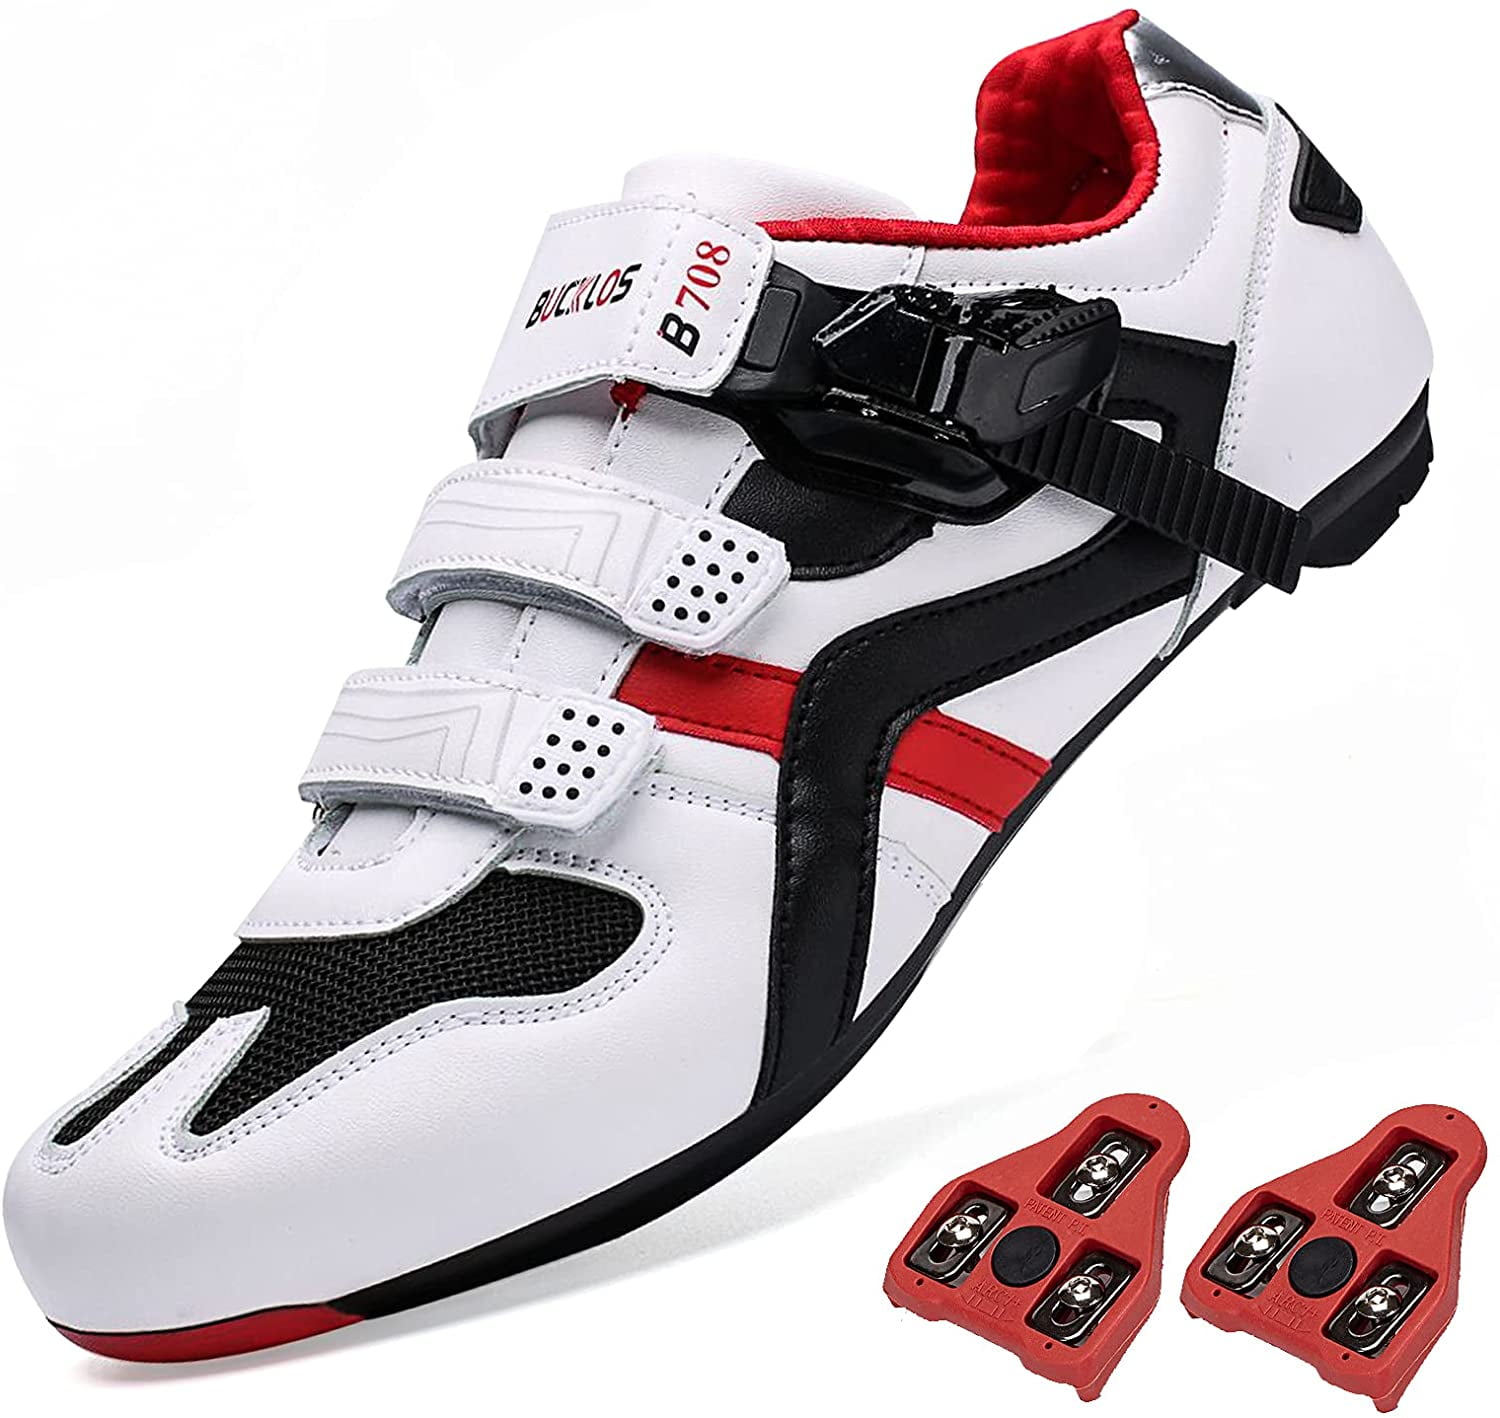 Fit Most Road Cycling Shoes Spining Indoor Cycling and Specialized Bike Cleats Set Black Aolvo Mountain Bike Cleats for SPD 